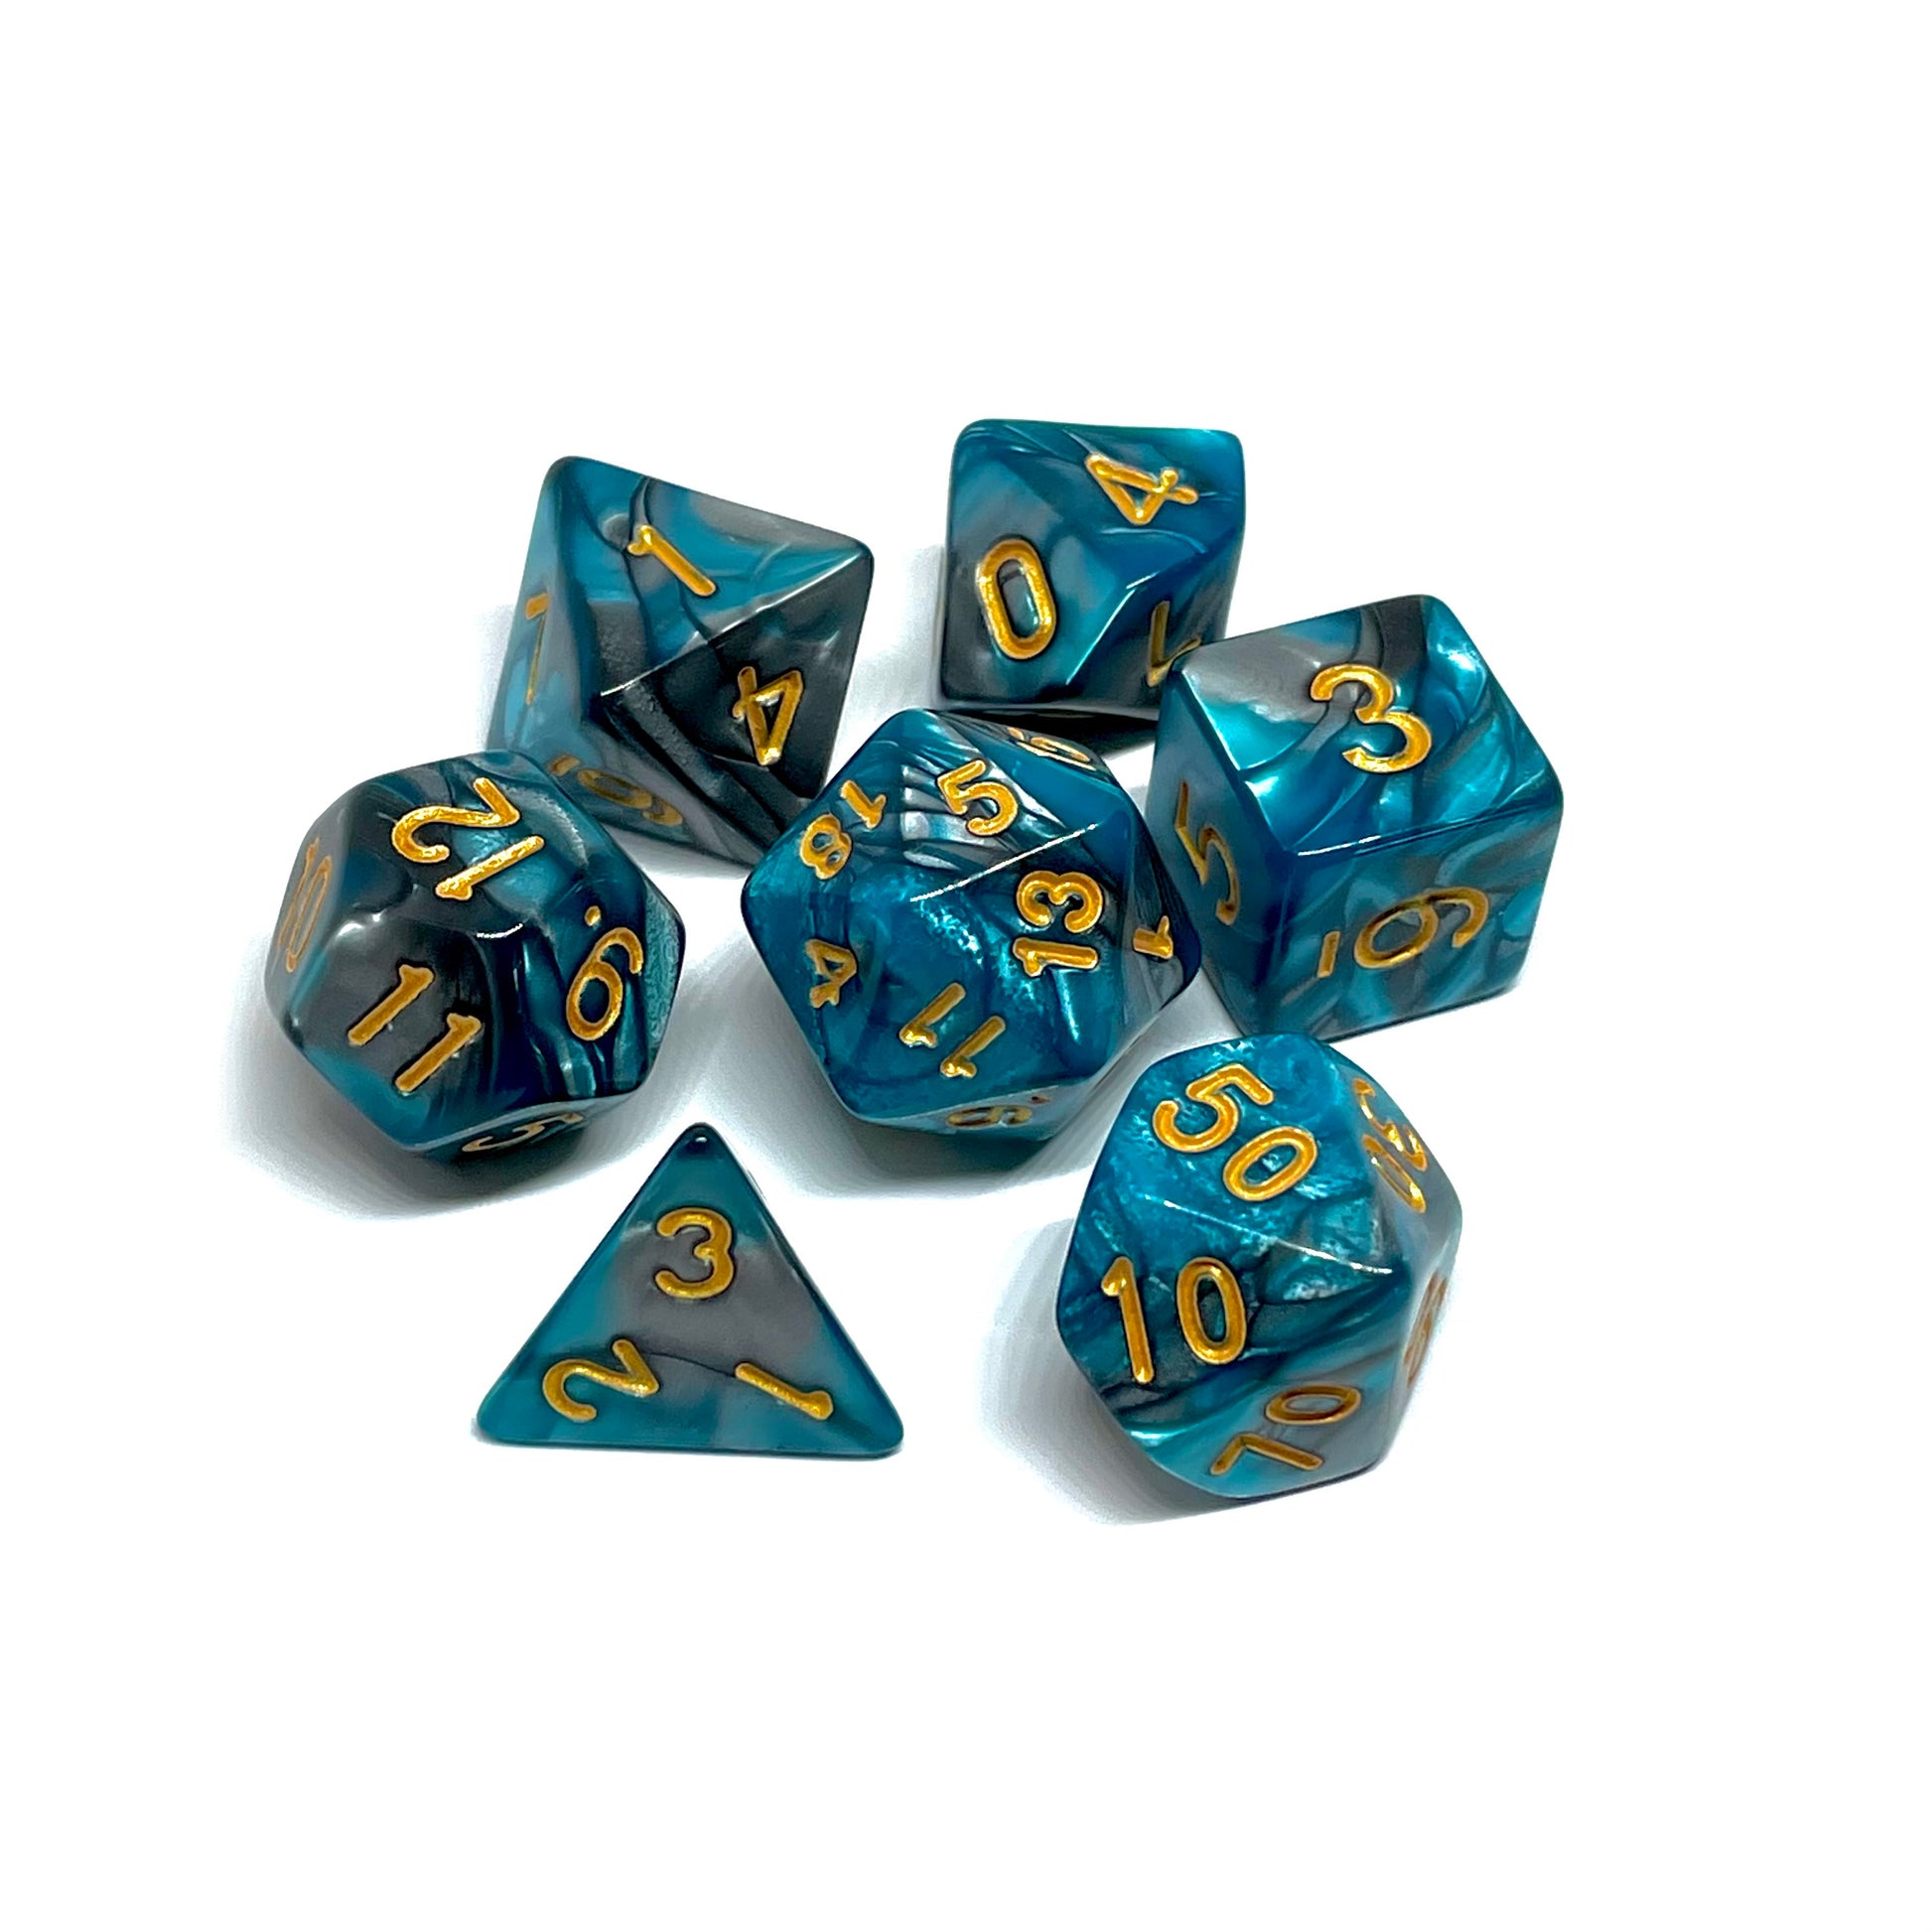 Kuo Toa Plastic Blue dnd Dice Set of 7 